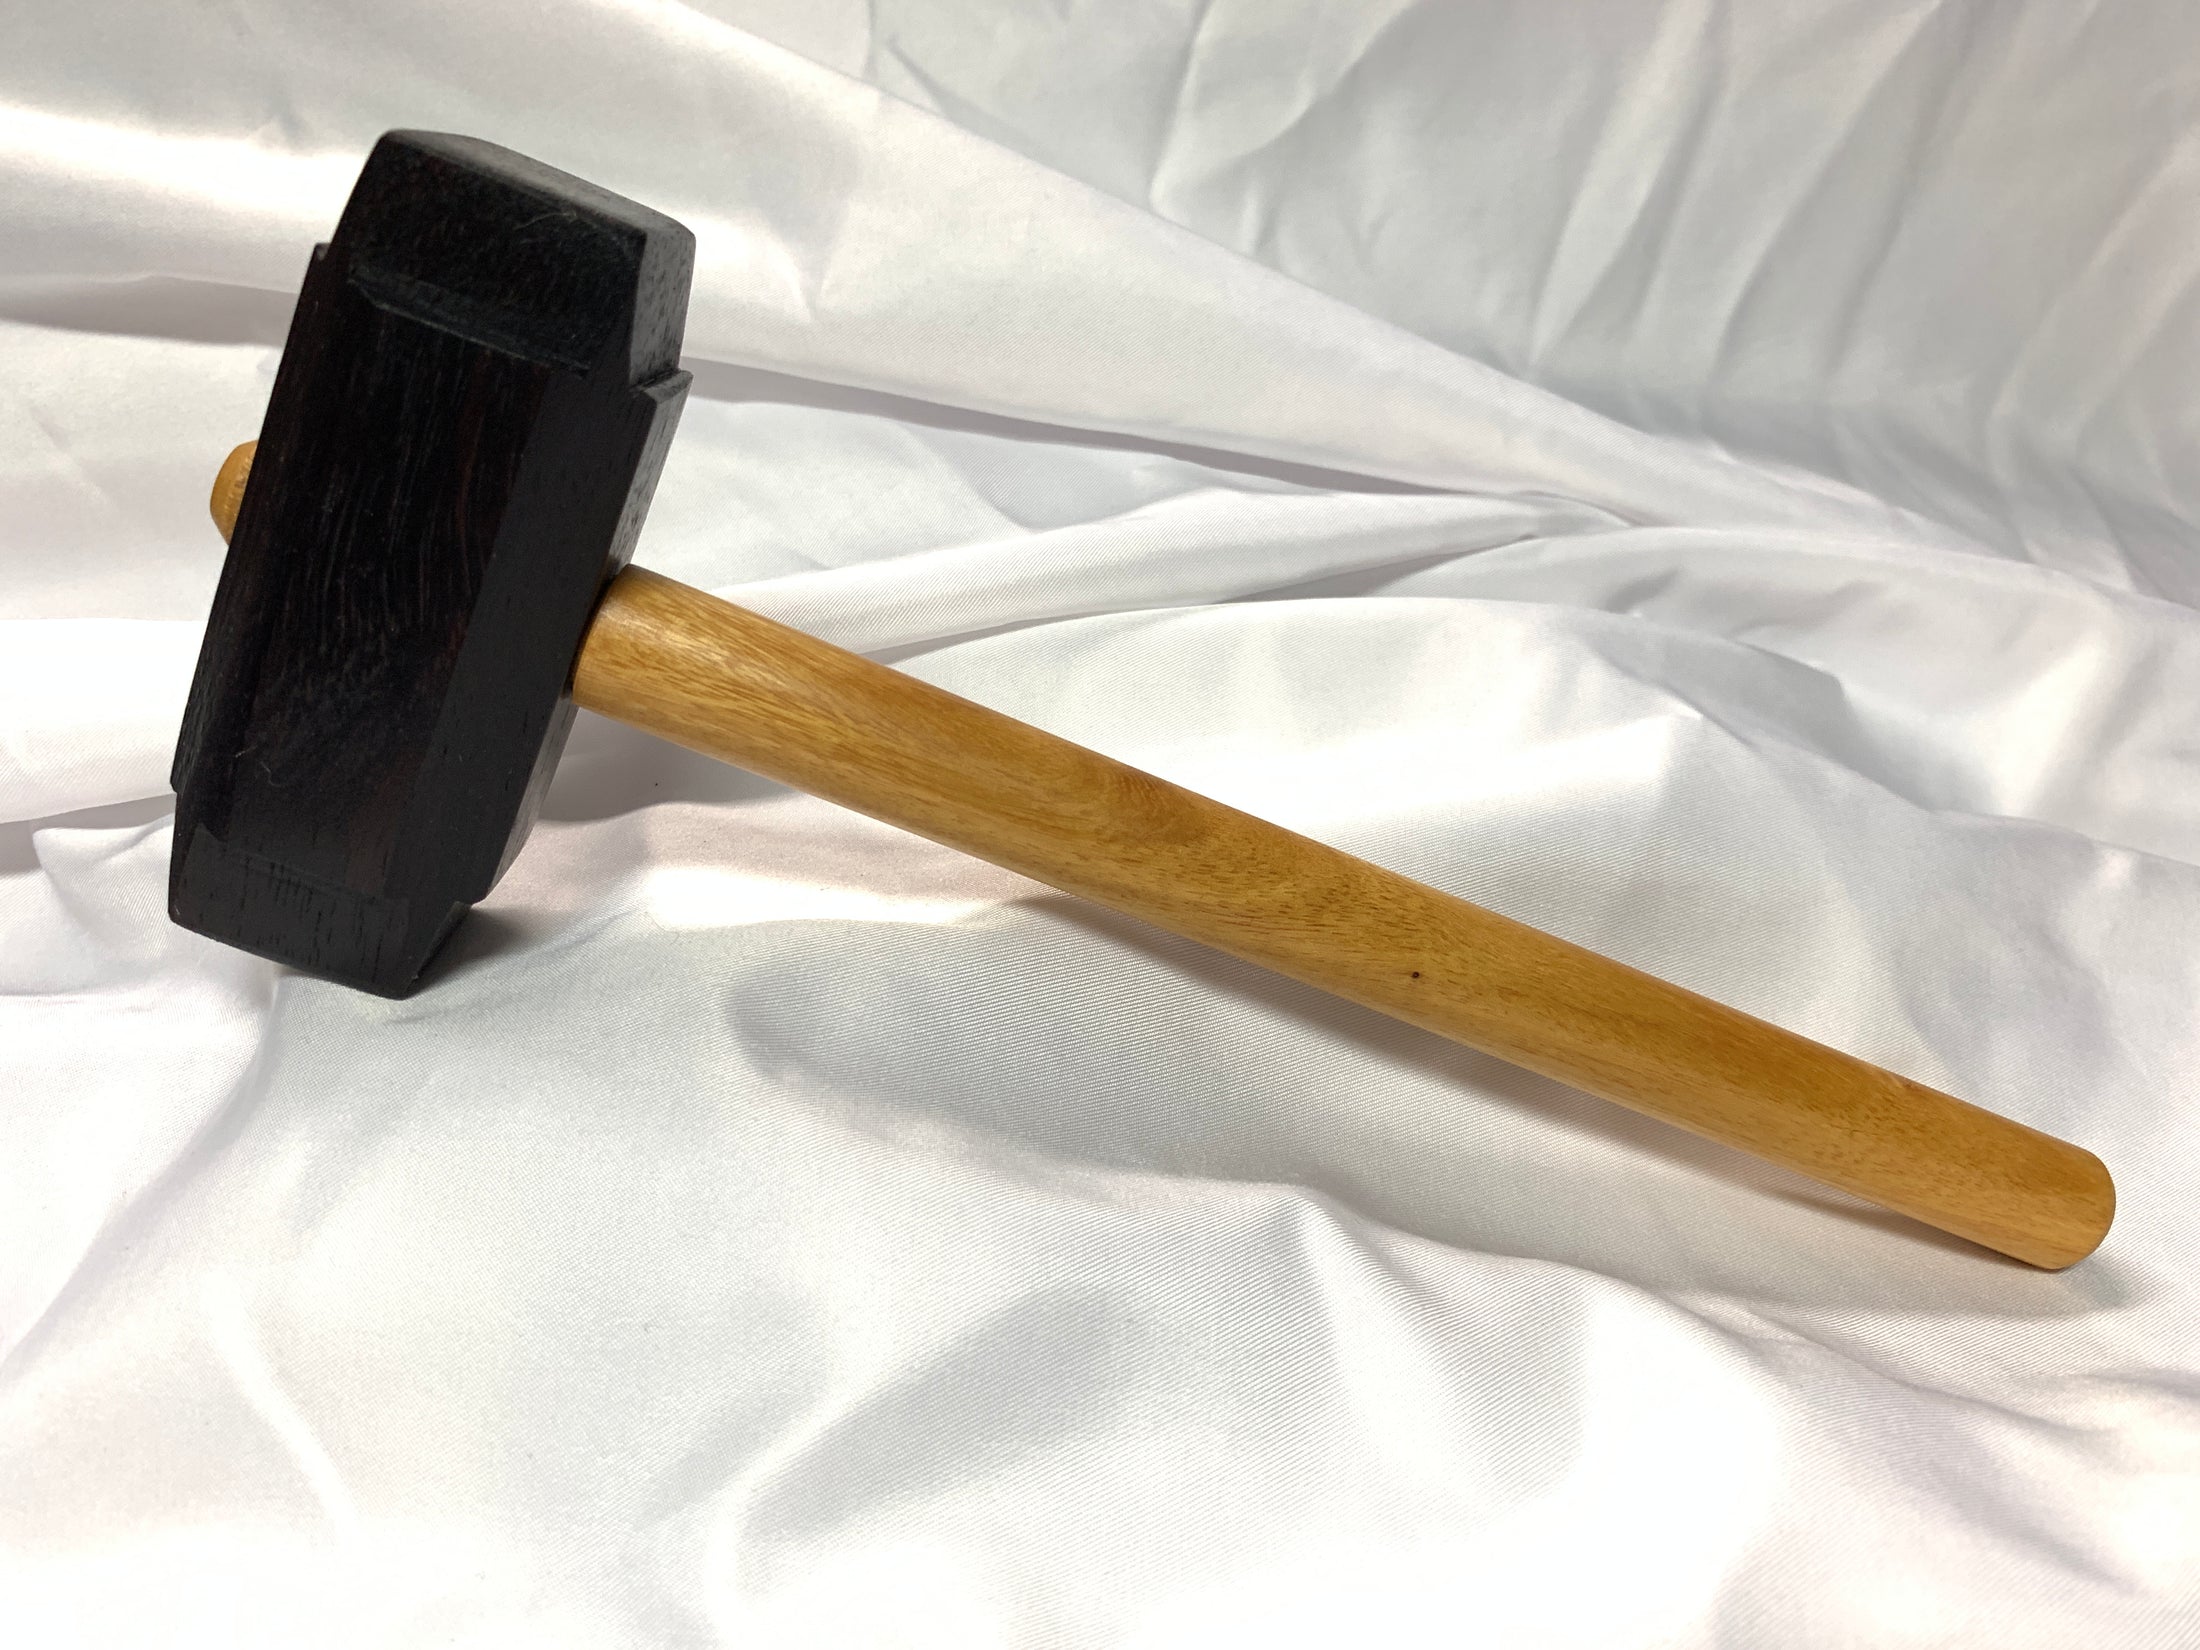 Thors Hammer Woodworking Mallet East Indian Rosewood Head with Osage Orange Handle Kings Fine Woodworking